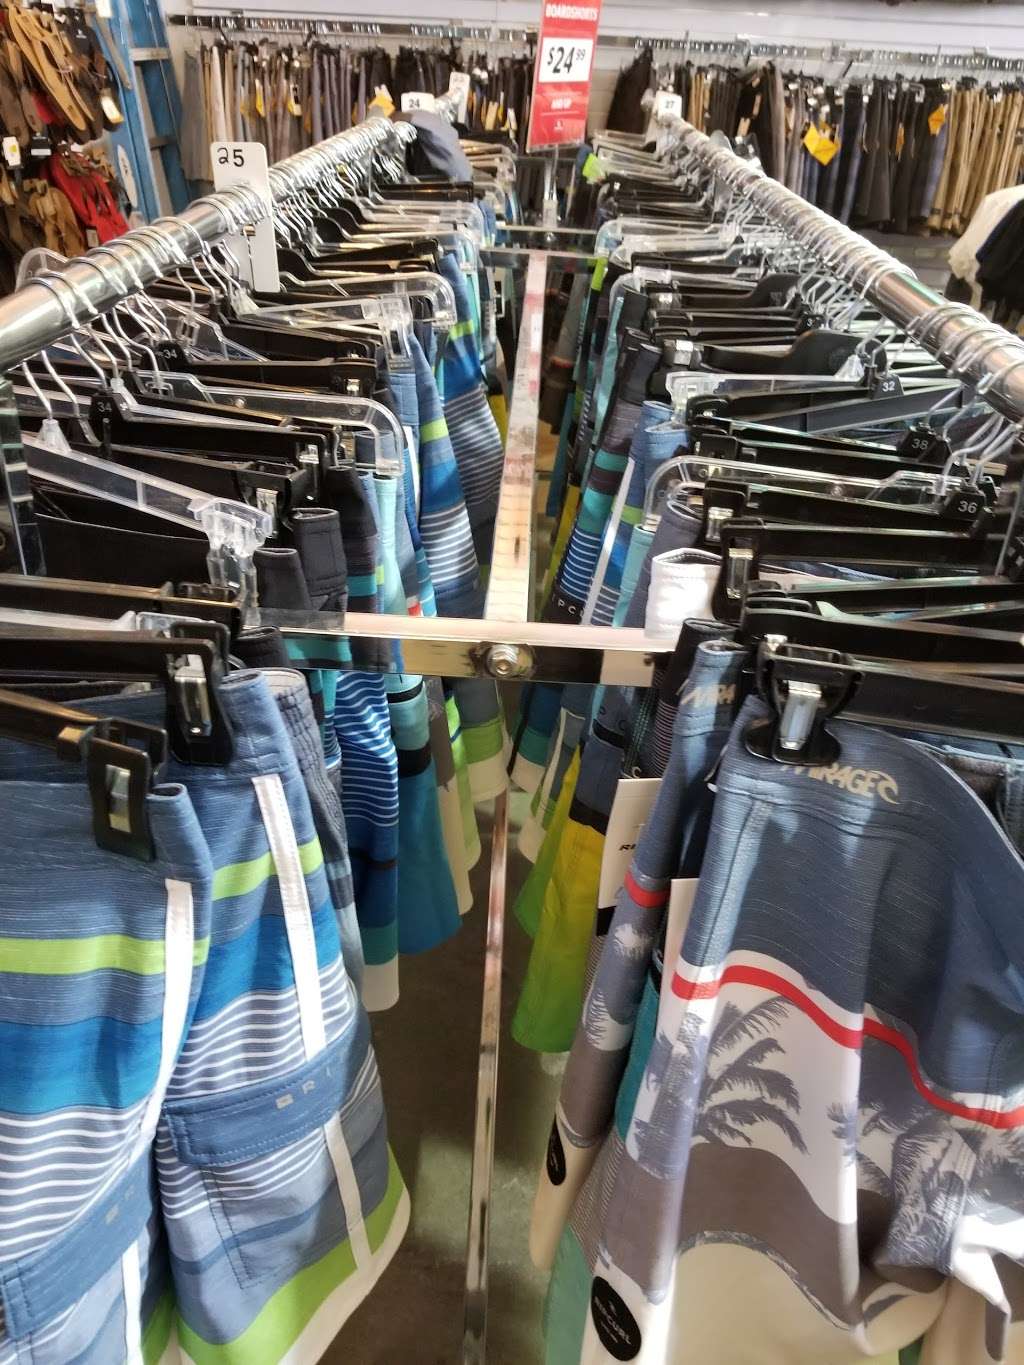 Rip Curl - San Clemente (outlet) | 3011 S El Camino Real, San Clemente, CA 92672, USA | Phone: (949) 498-7474